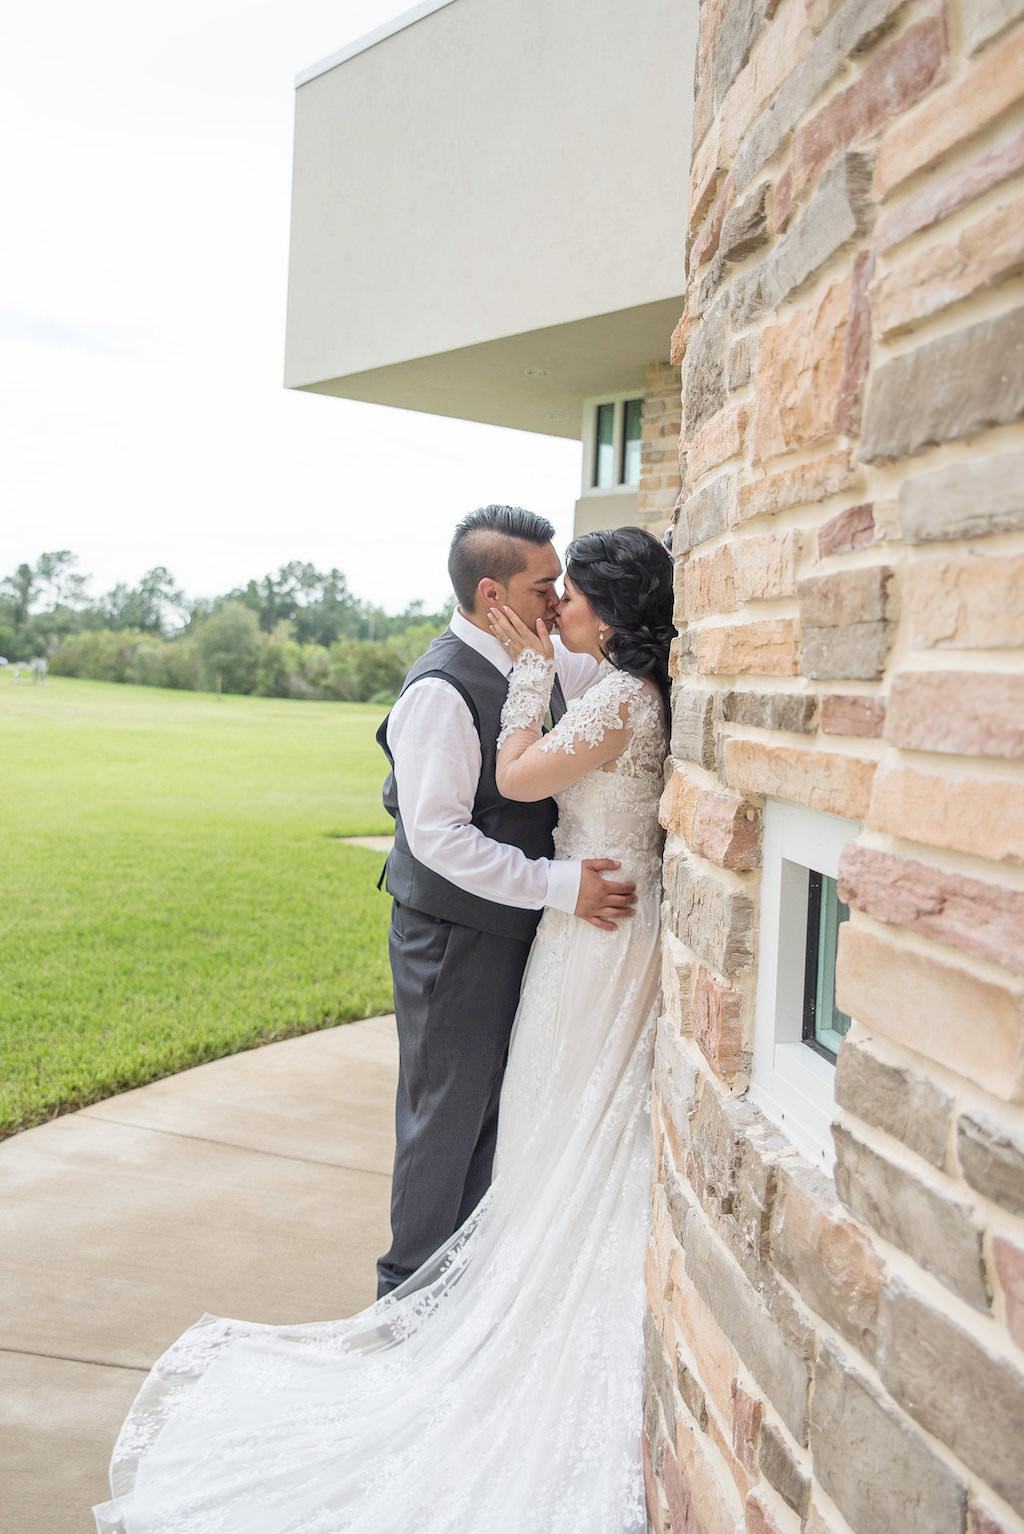 Outdoor Bride and Groom Wedding Portrait, Bride in Lace Long Sleeve Traditional Wedding Dress | Tampa Bay Photographer Kristen Marie Photography